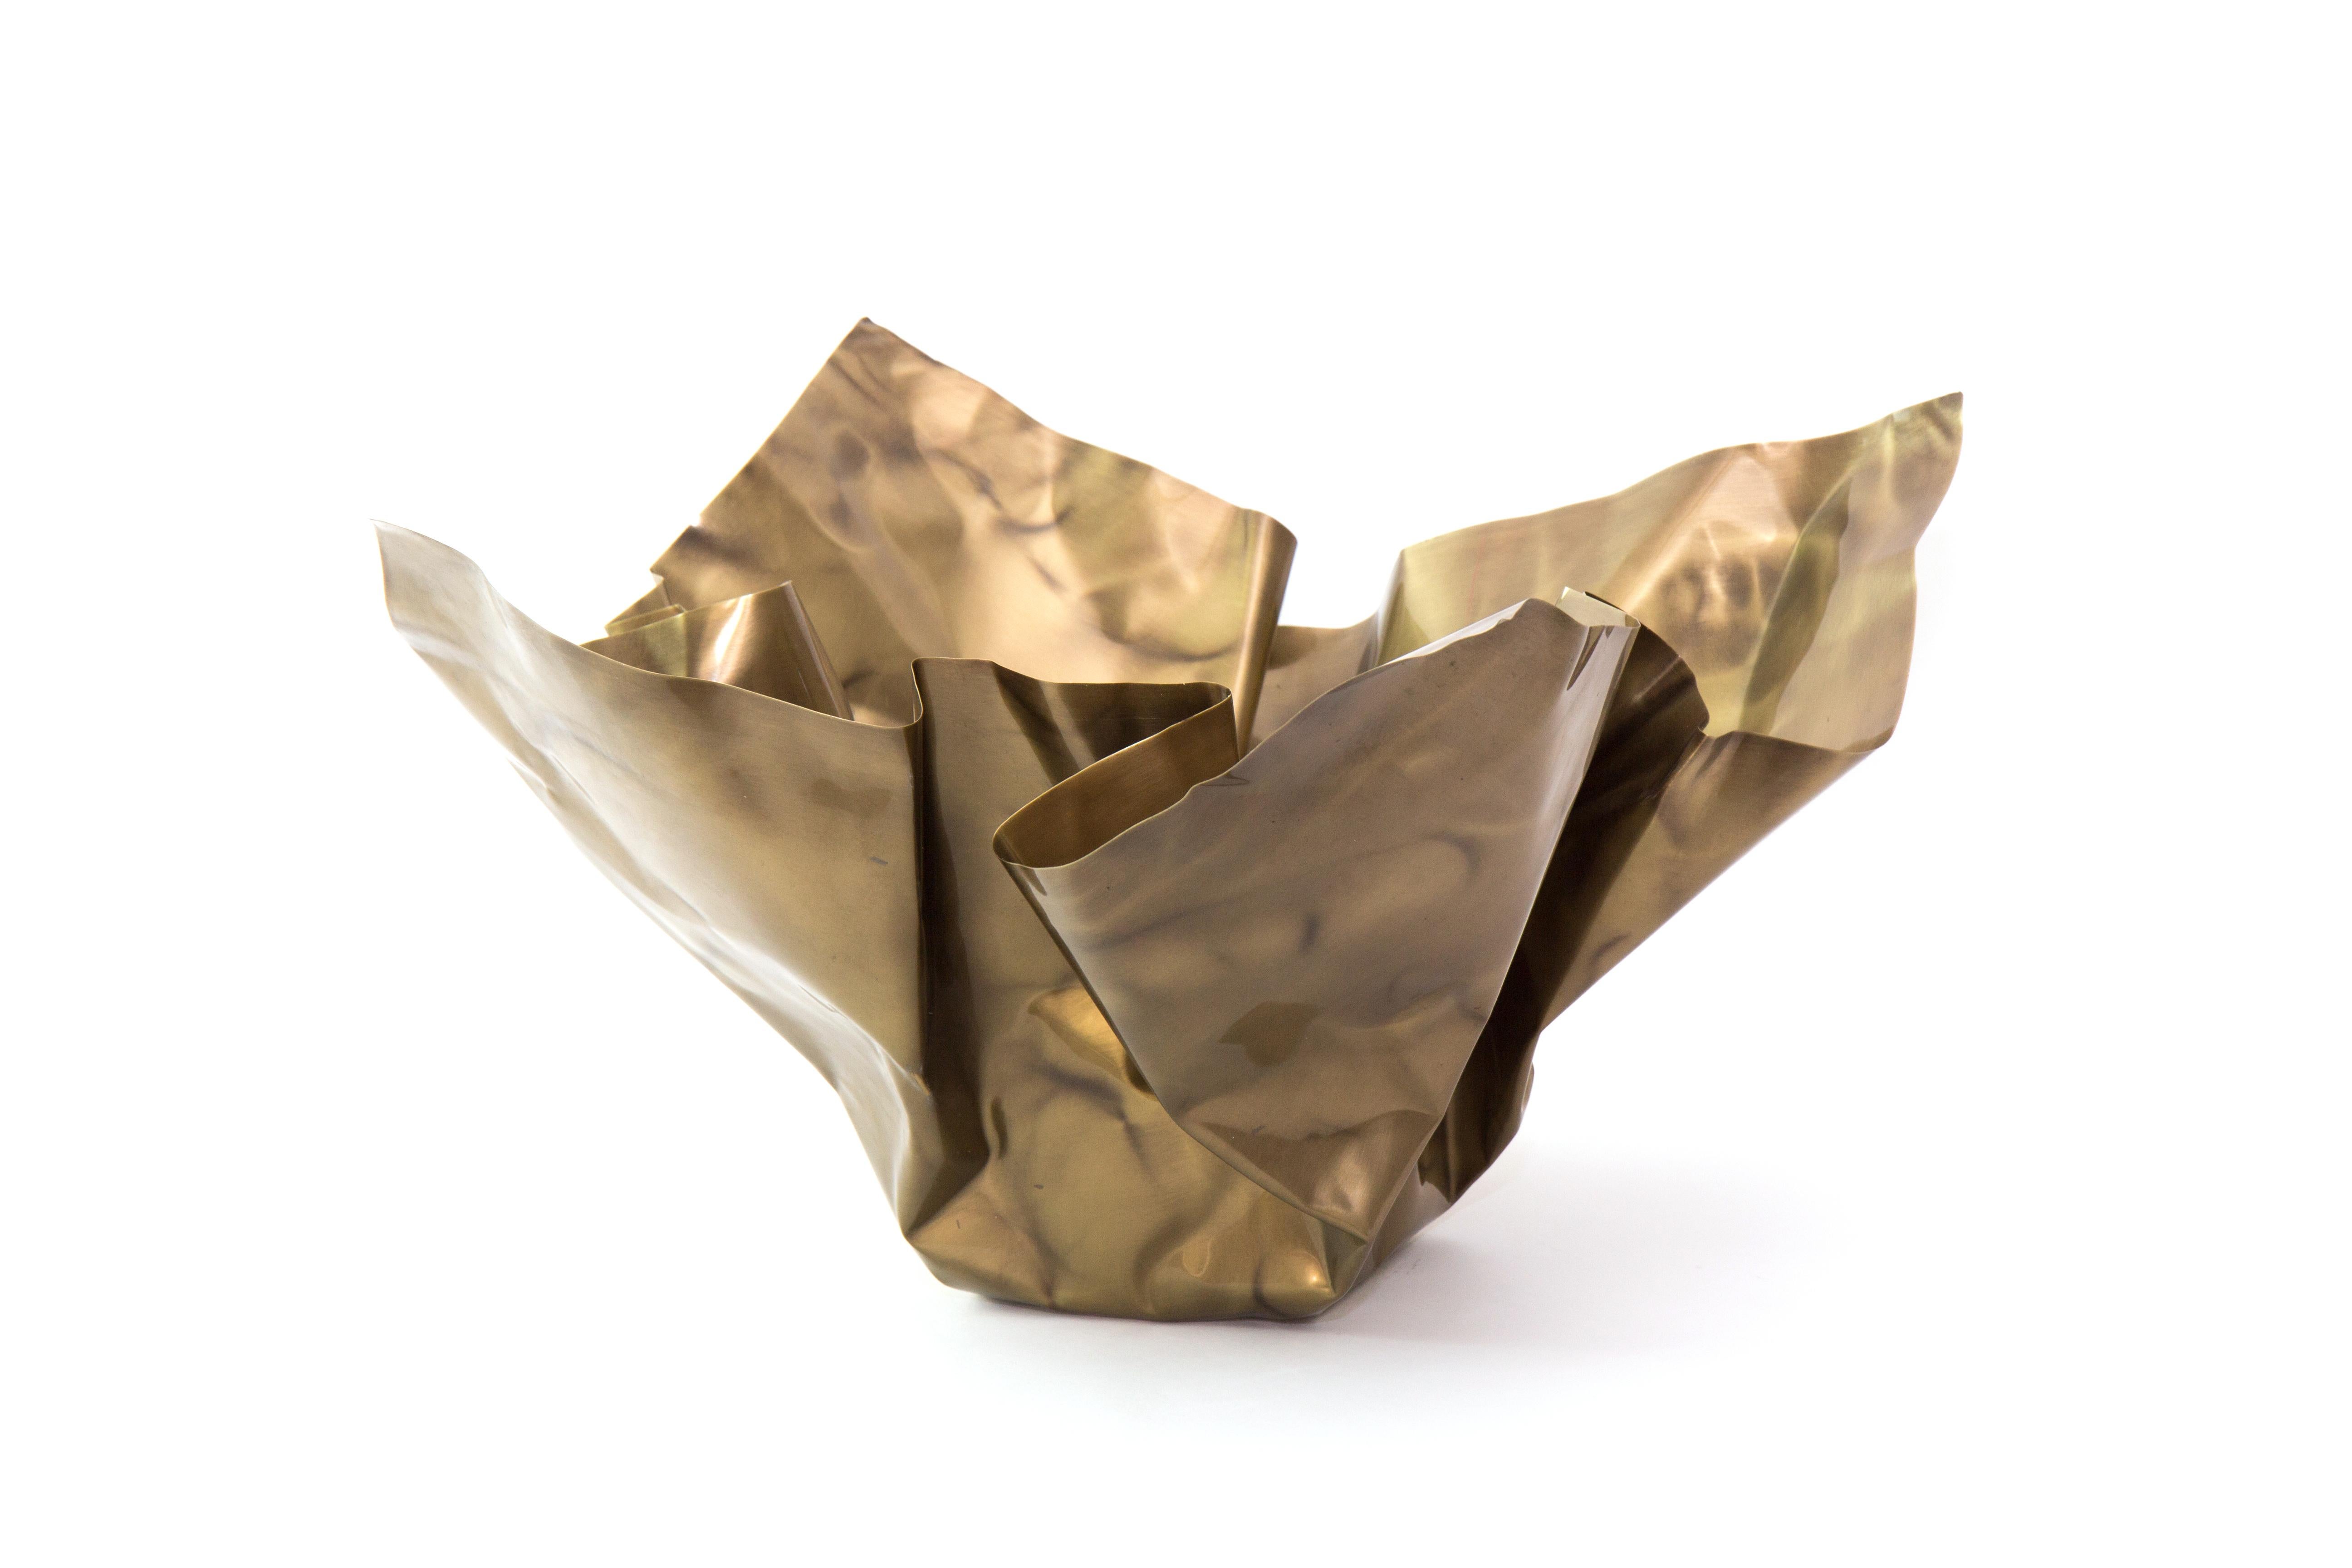 Paper brass bowl III by Gentner Design
Dimensions: D 50 x W 50 x H 25.5 cm
Materials: tarnished brass
Available in tarnished brass and darkened brass.

The Paper Series embodies the idea of crumpling paper set in time. The materiality of the